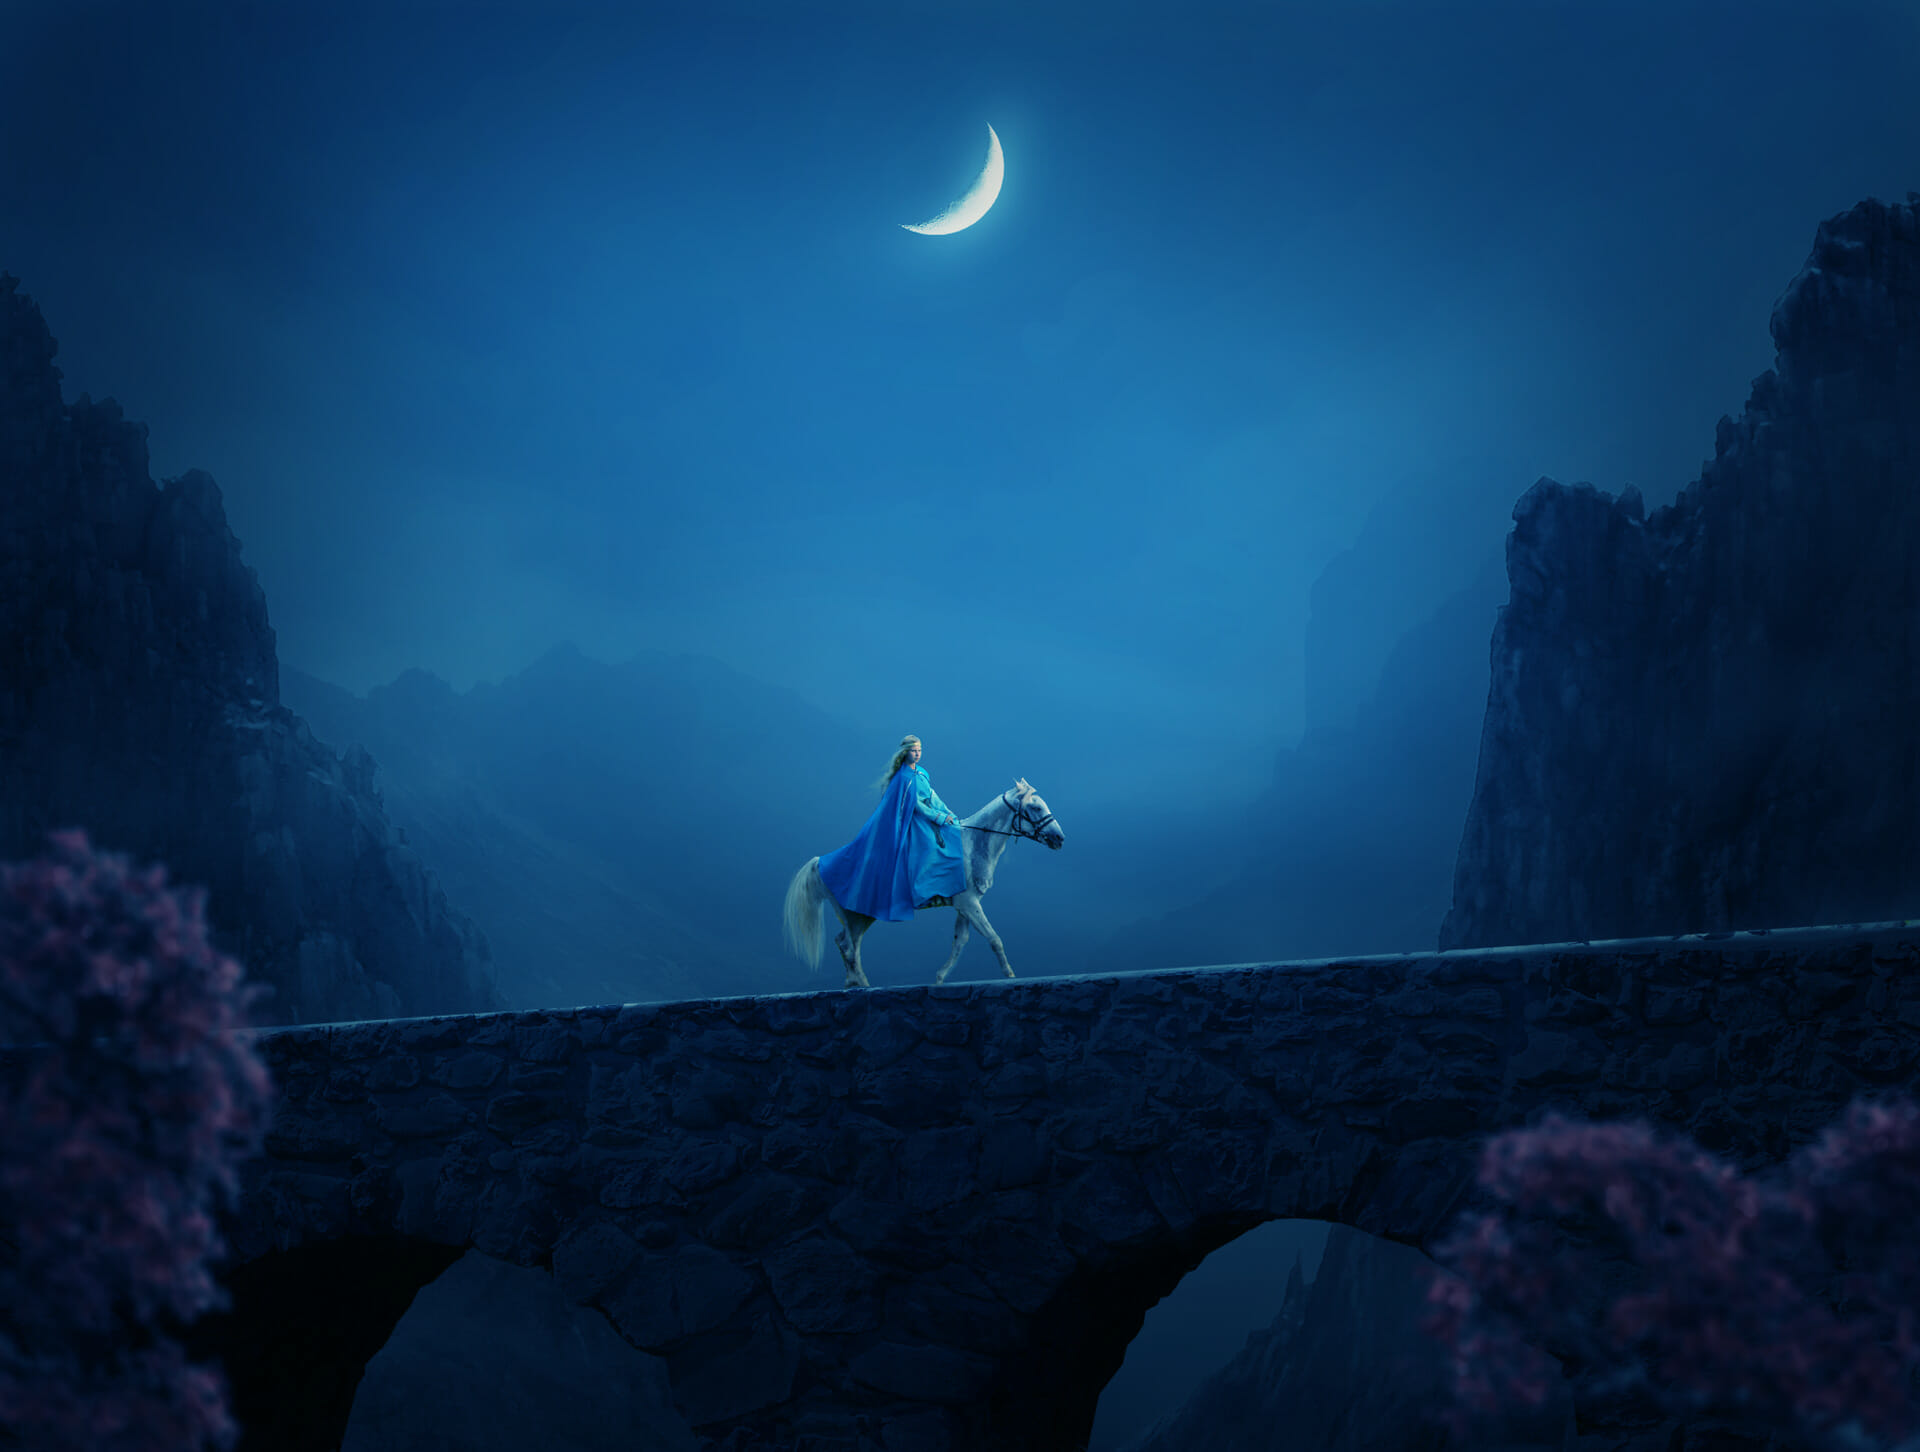 How to Create a Photo Manipulation of a Medieval Woman Riding Horse in a Night Scene